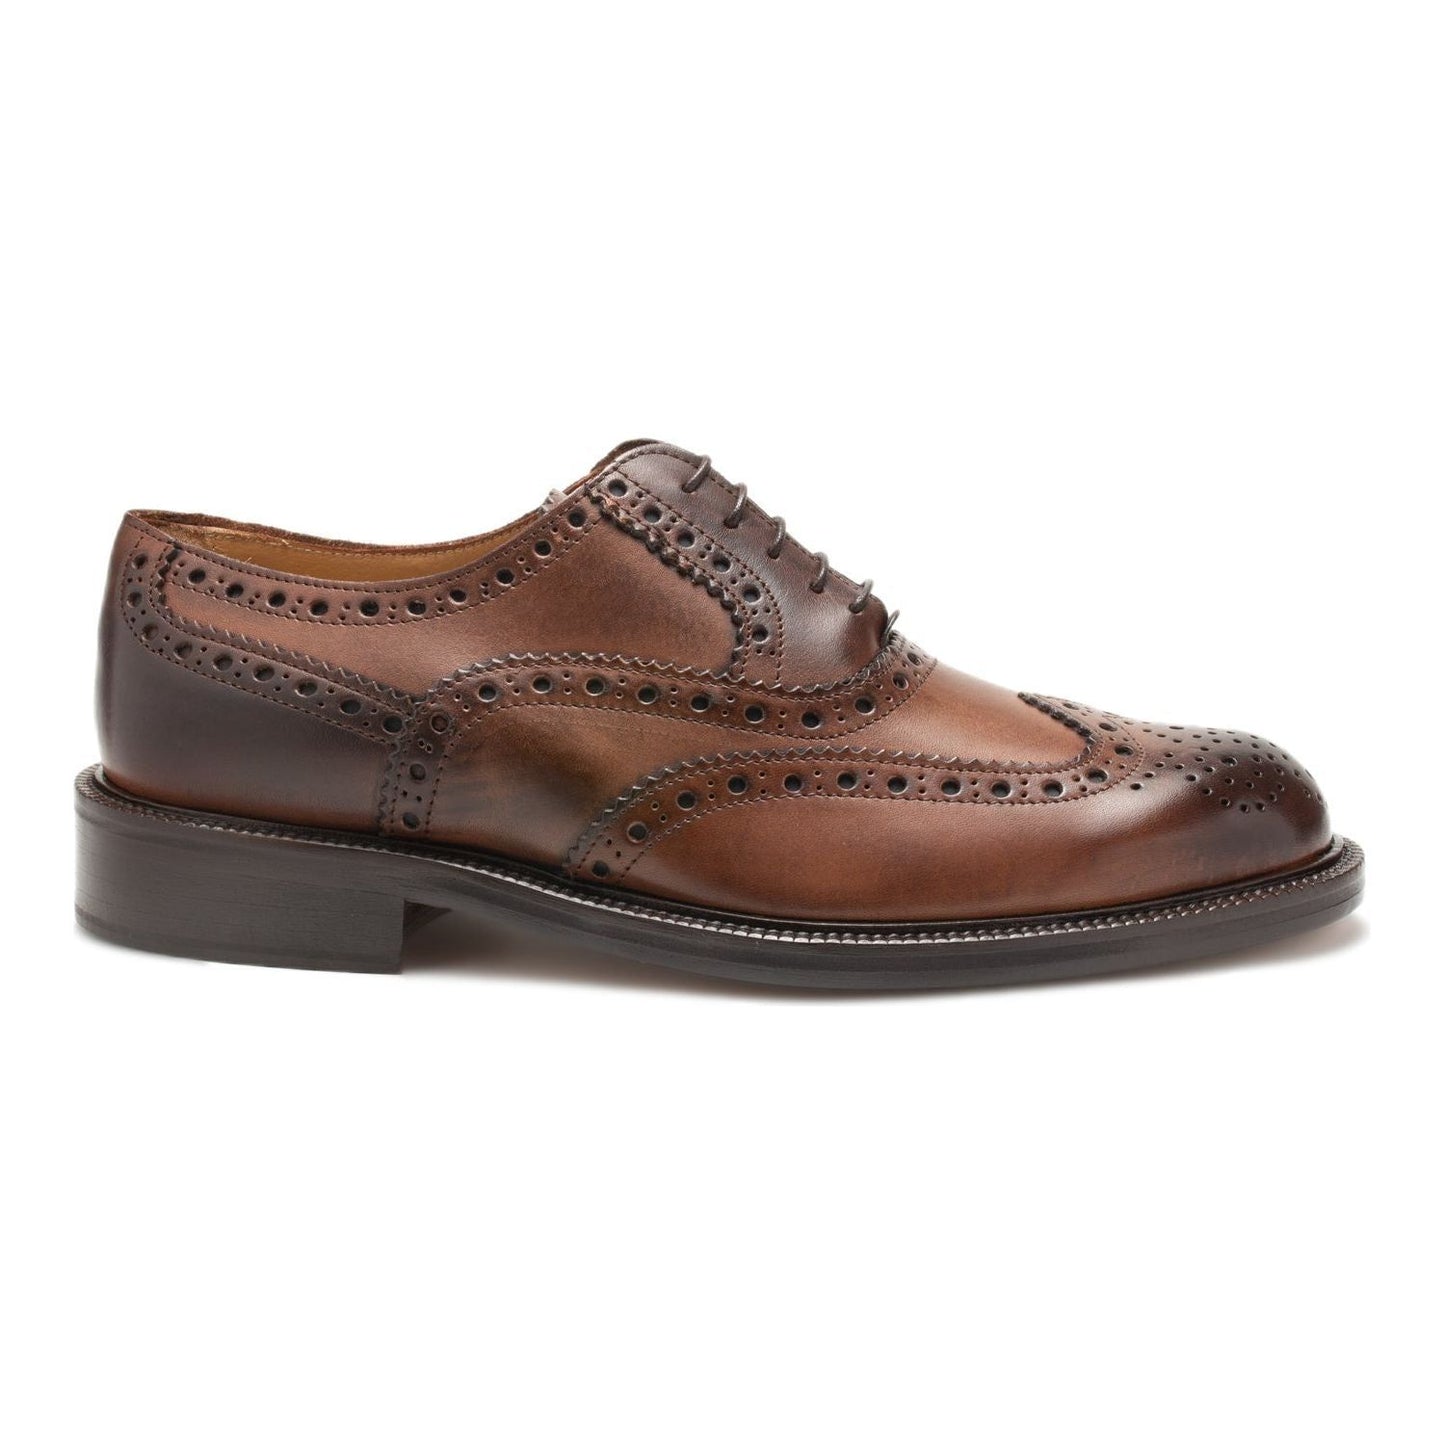 Saxone of Scotland Authentic Full Brogue Leather Dress Shoes natural-brown-leather-mens-laced-full-brogue-shoes SM_Lato_MasterCuoio-0c4847d5-bd7.jpg